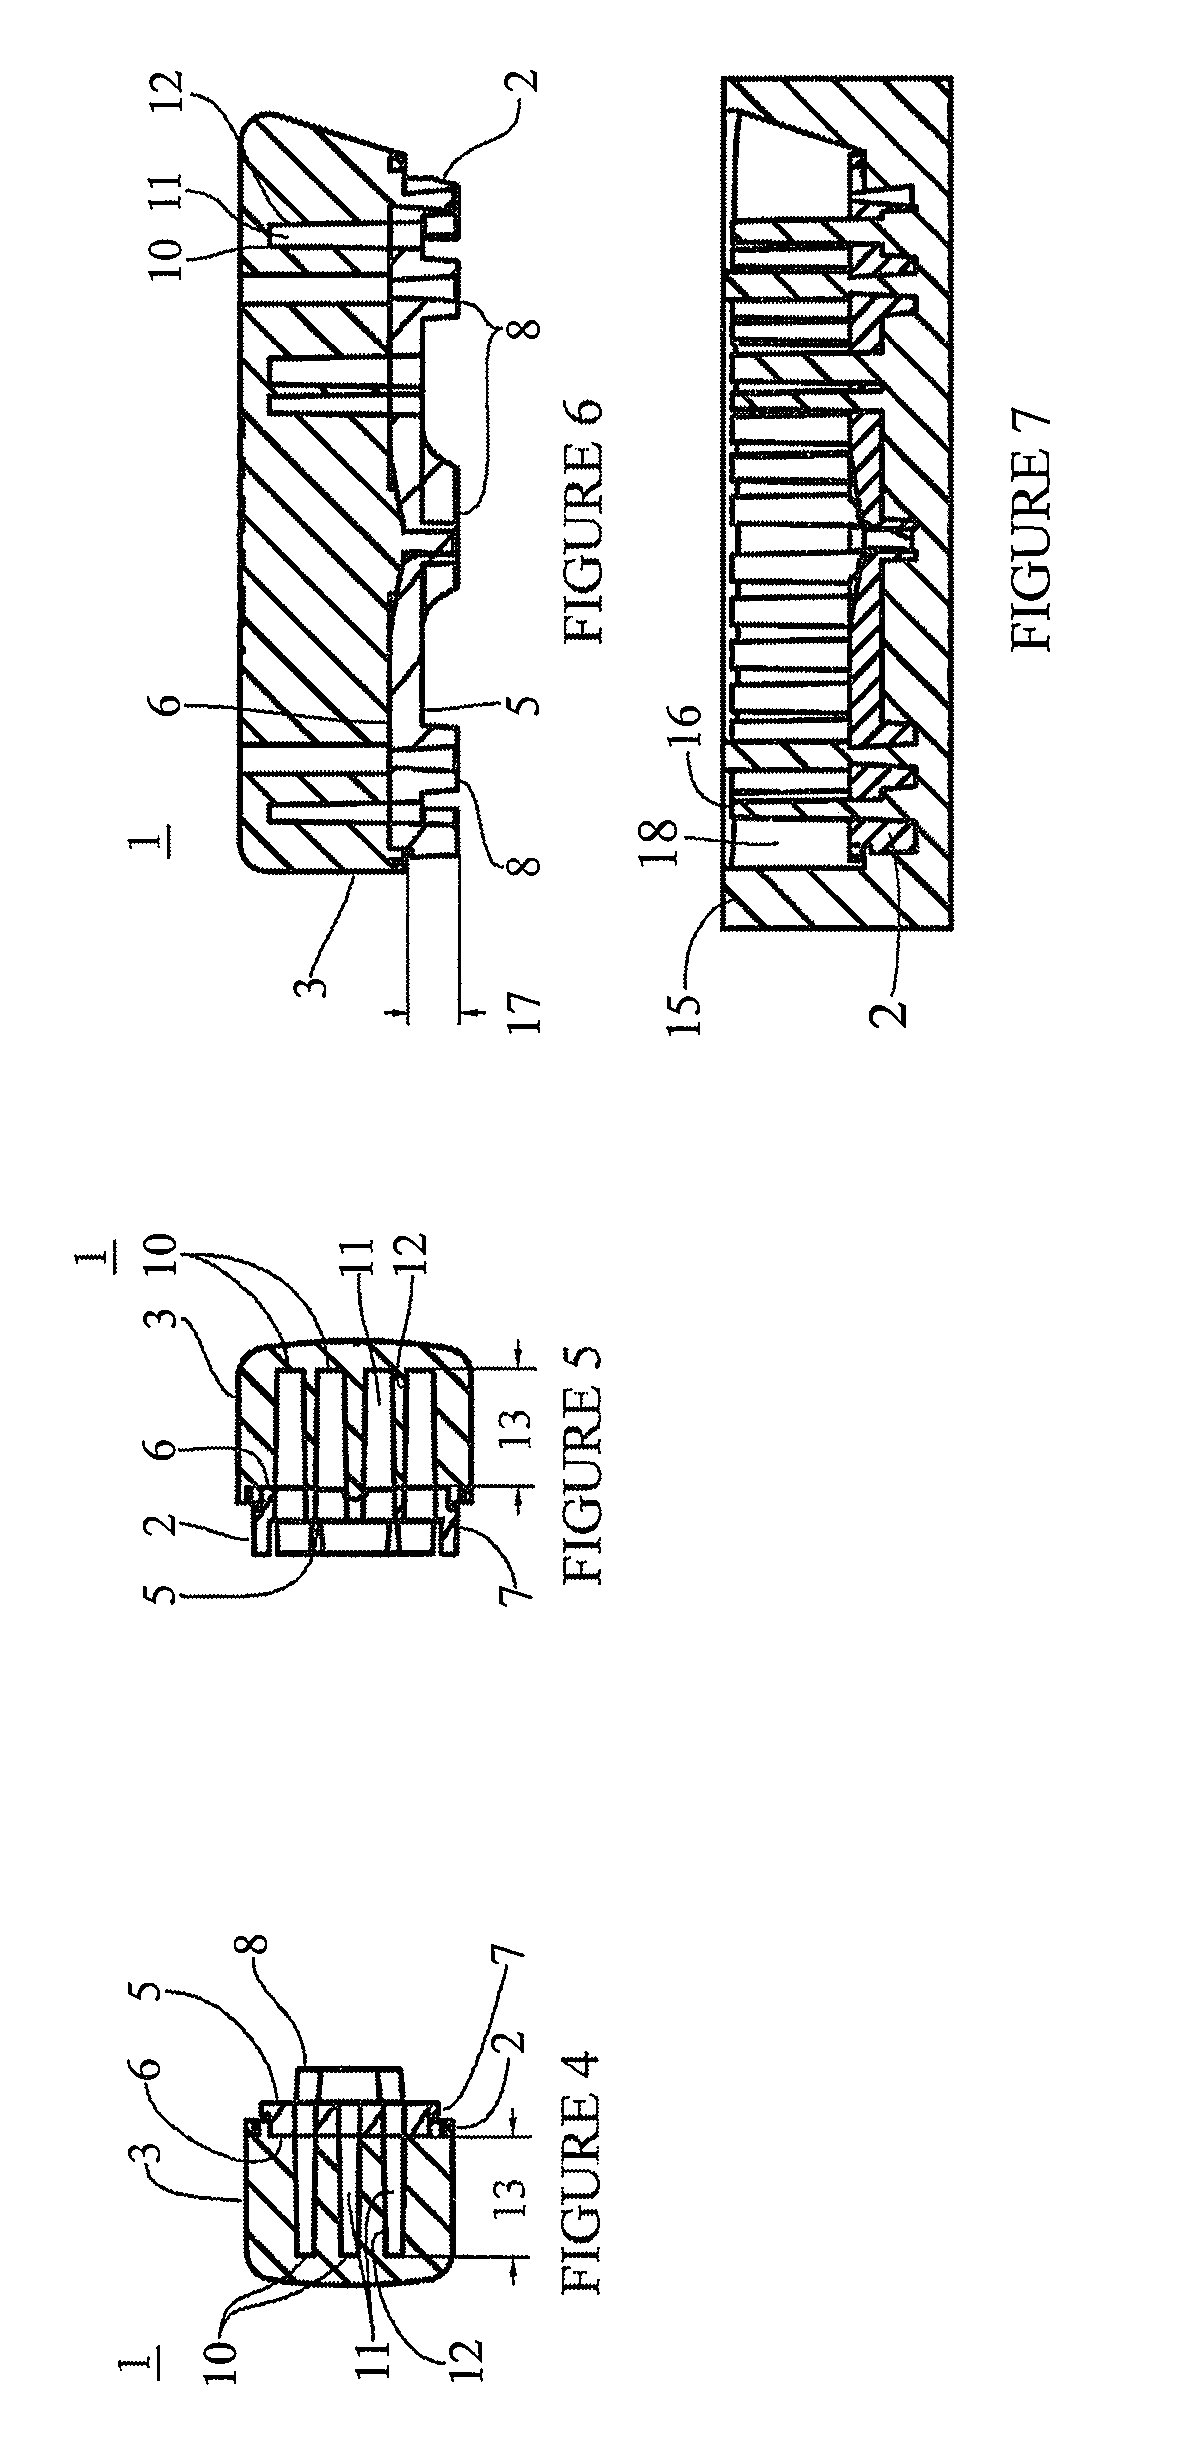 Method of producing a recoil pad for a weapon